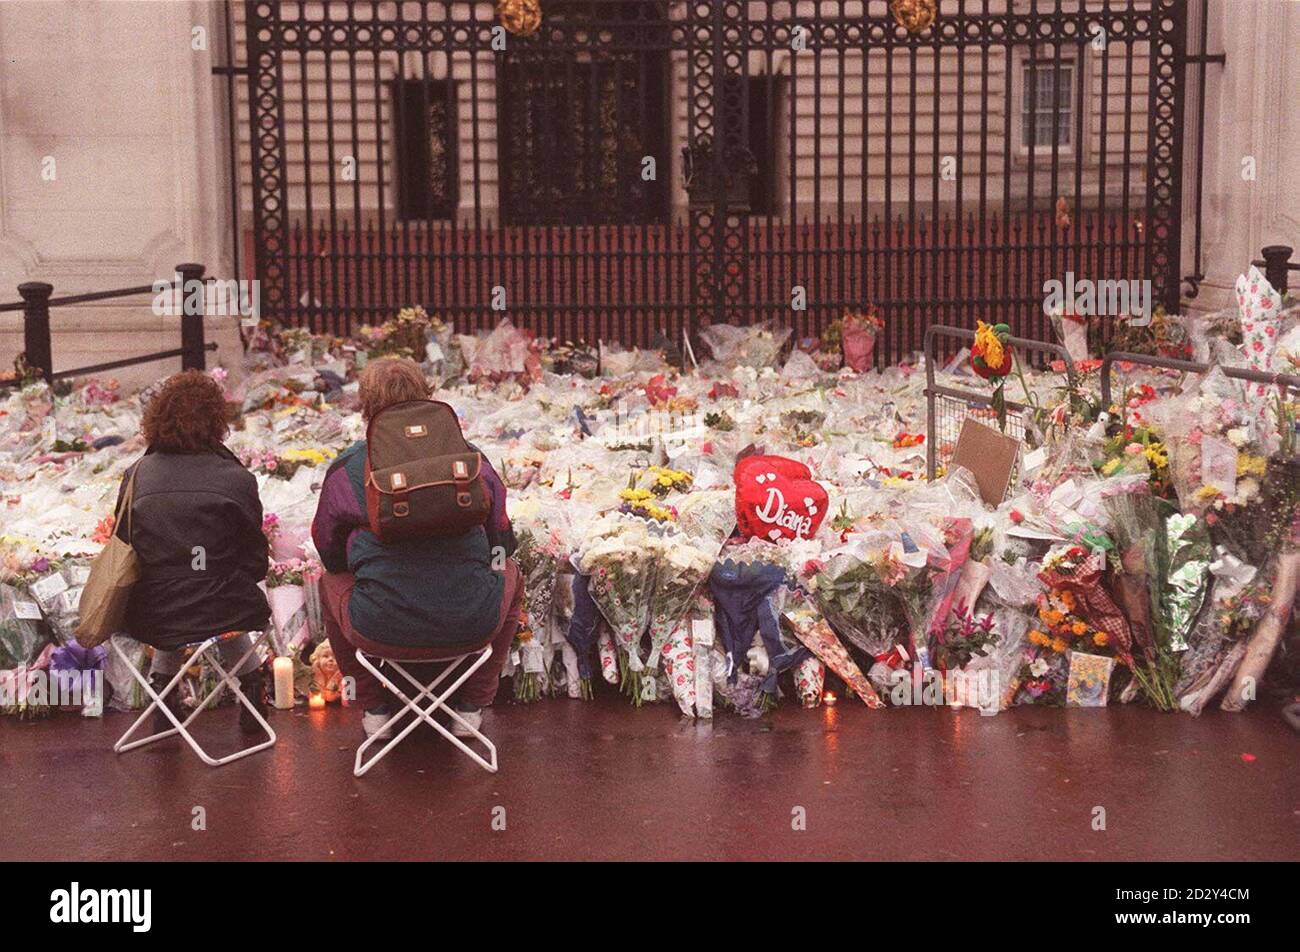 Two mourners sit and contemplate outside the gates of London's Buckingham Palace today (Thursday) and pay their respects to Diana, Princess of Wales.  Photo by Ben Curtis/PA. Stock Photo